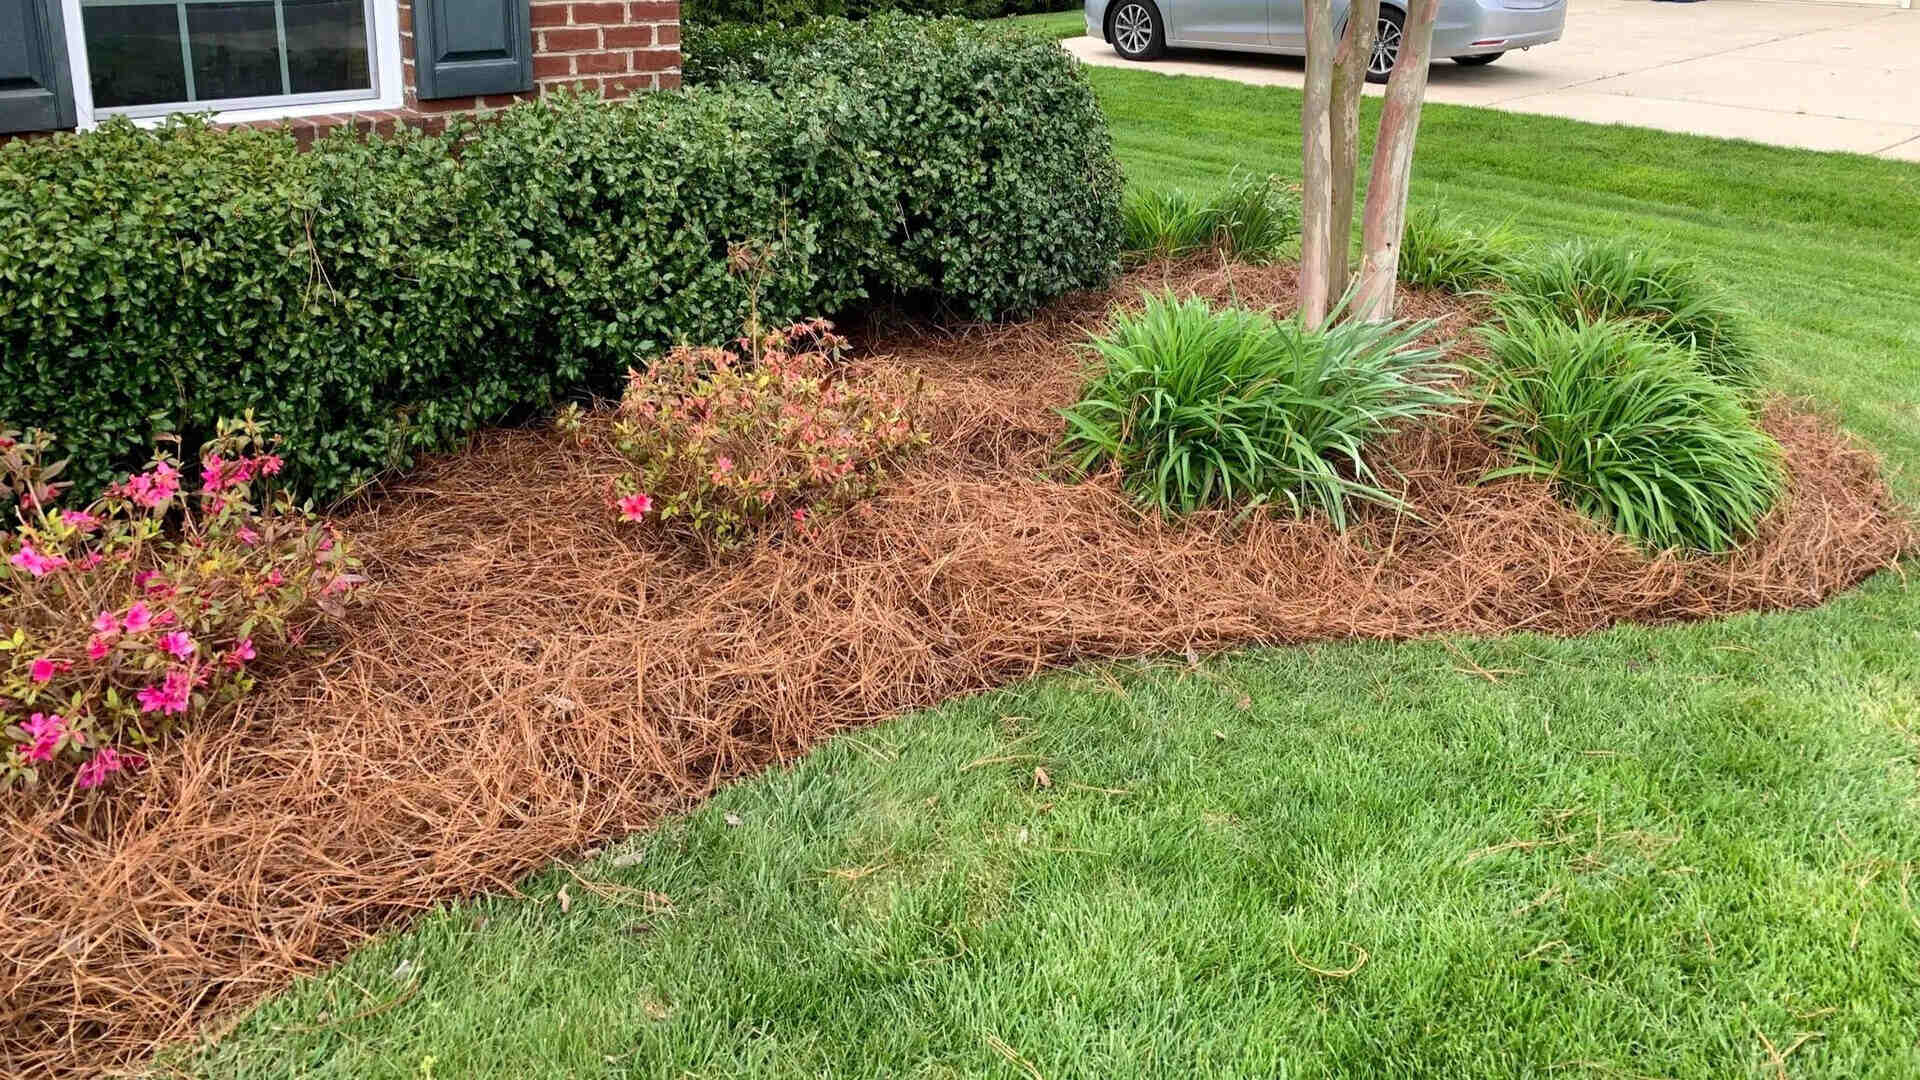 What Are The Benefits Of Using Pine Straw, Wood Chips, Or Mulch As Ground Cover?